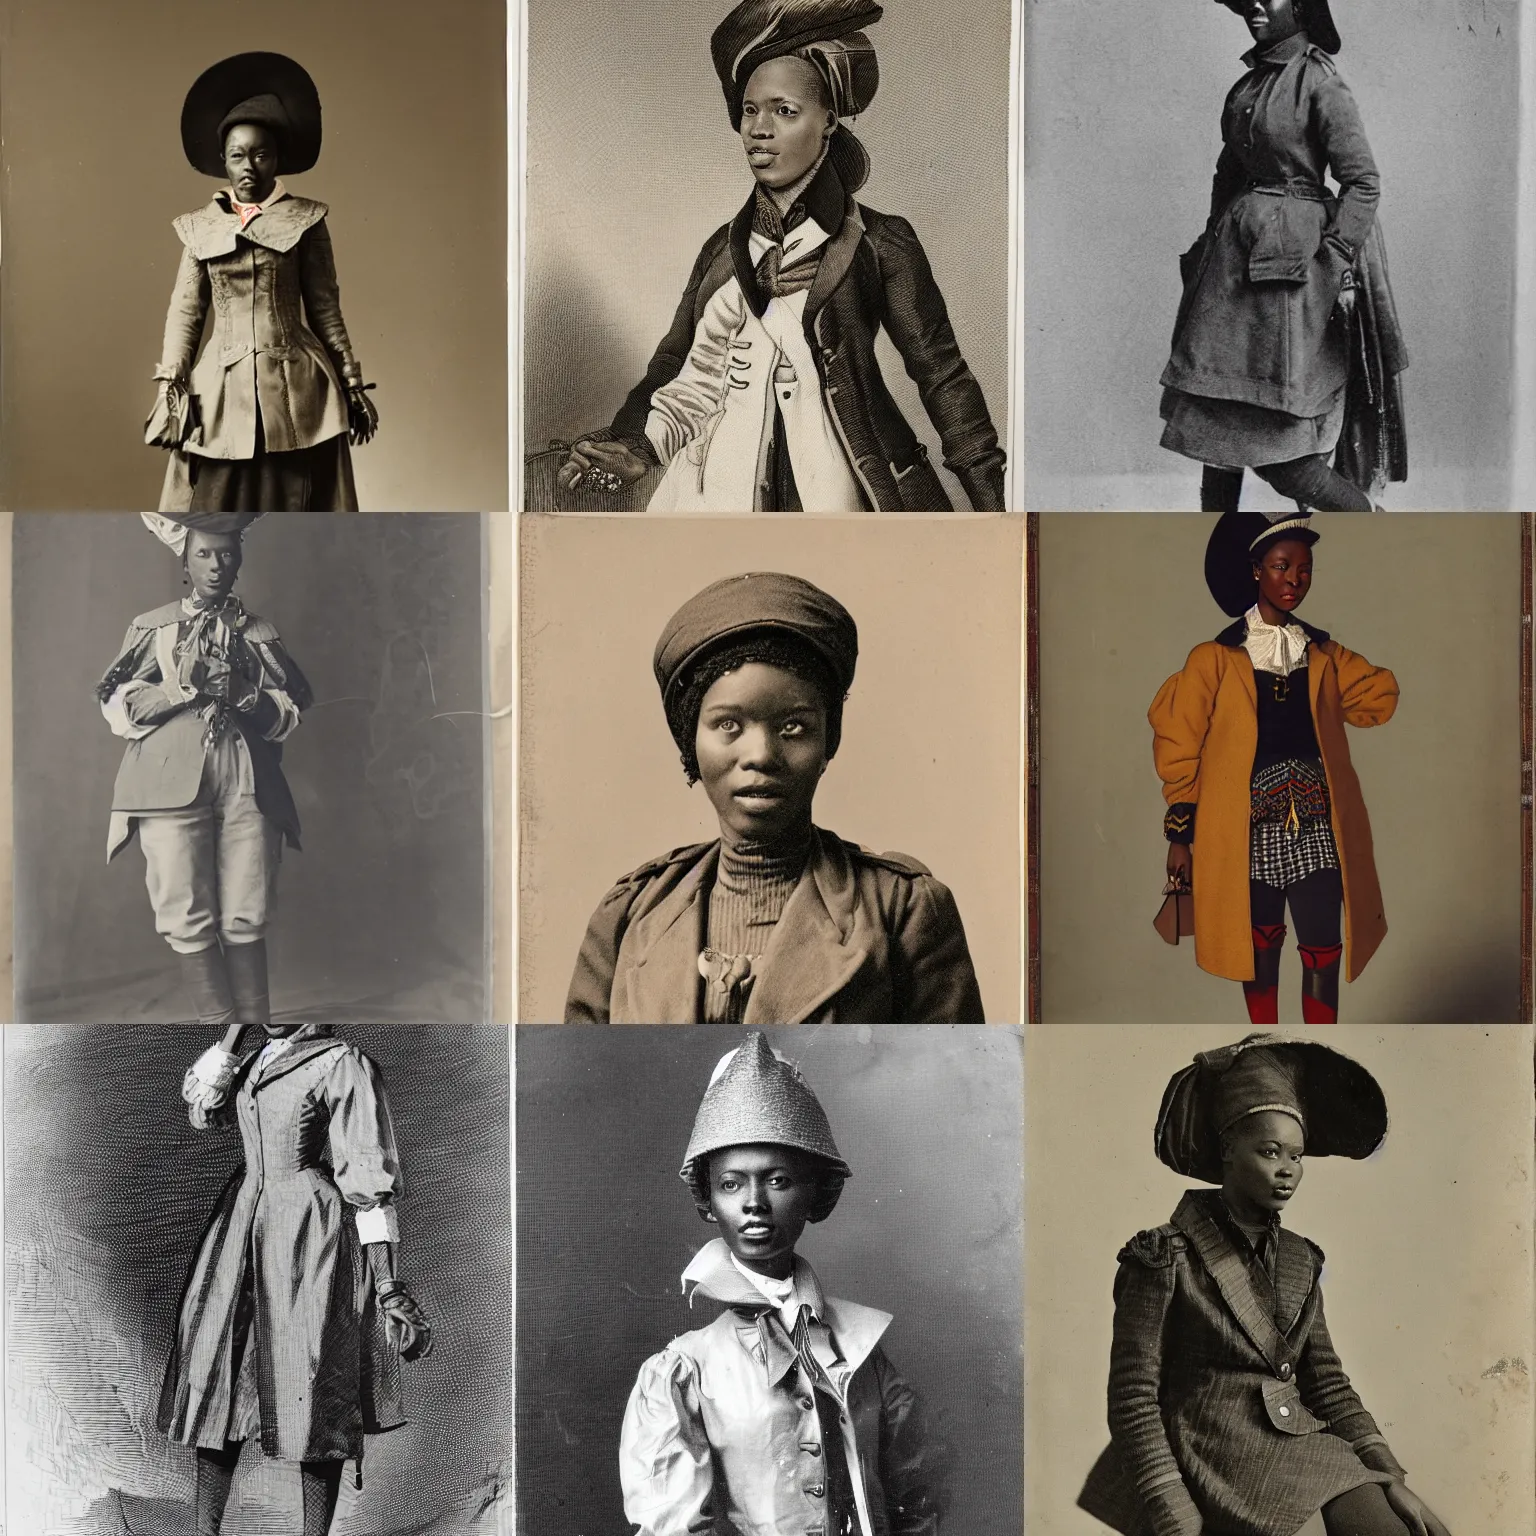 Prompt: A young African woman, wearing a mess coat, breeches, stockings, and tricorn hat